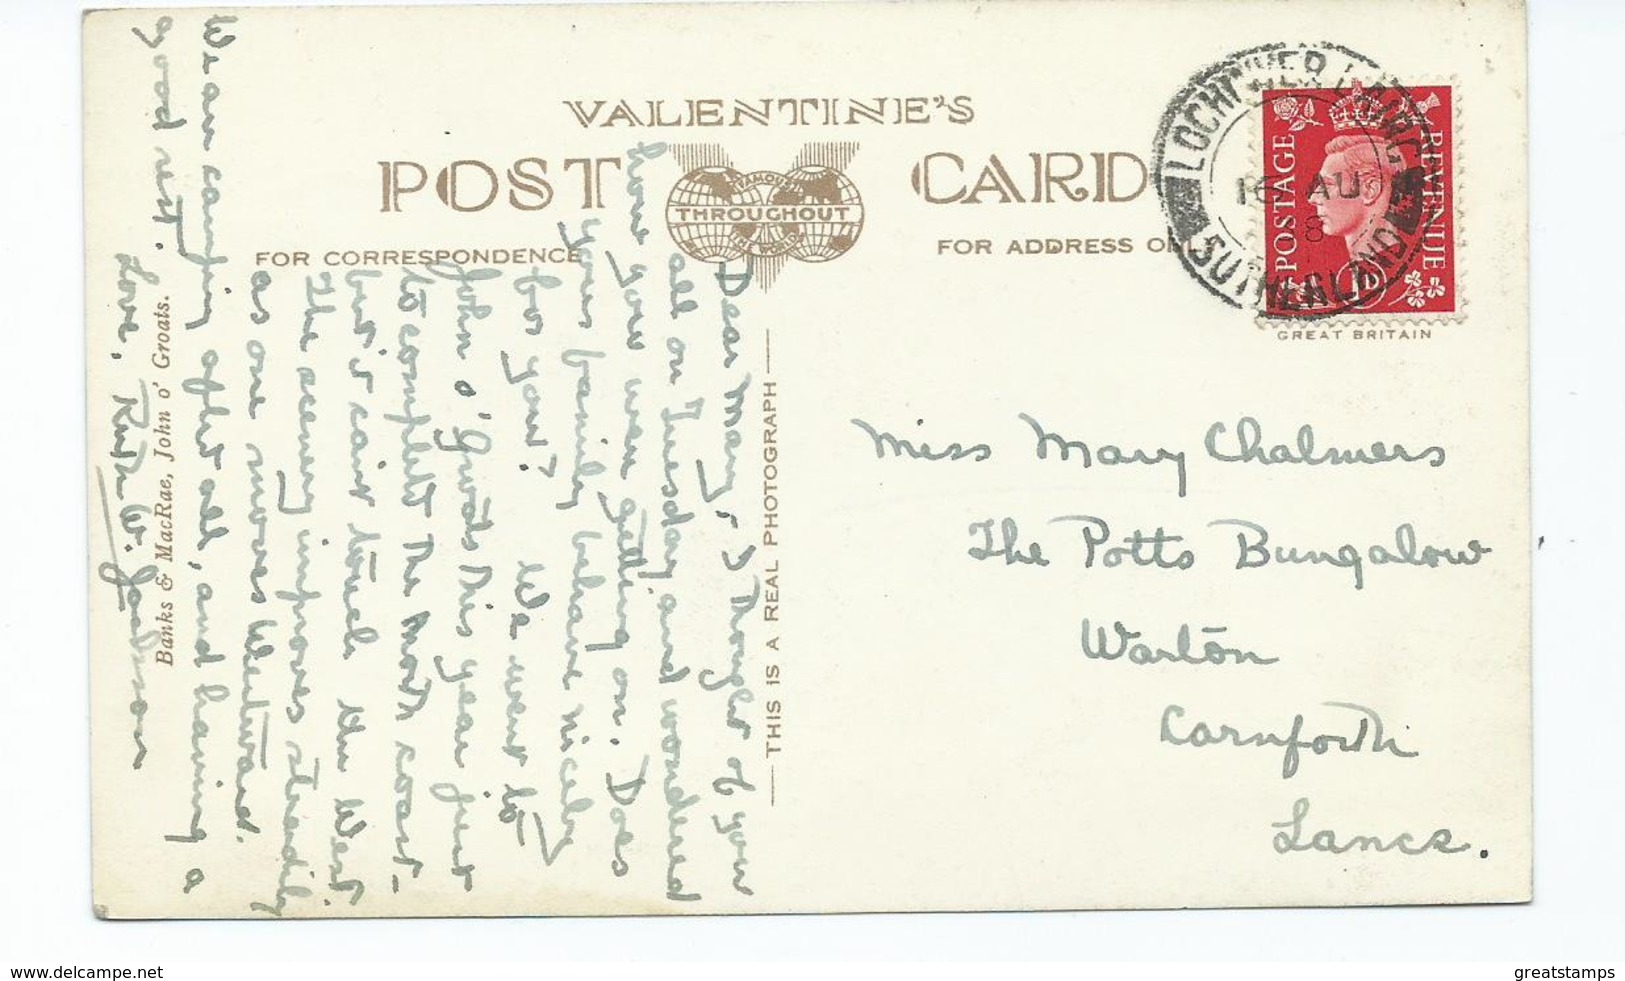 Scotland Postcard Rp John O Groats The Stacks Rp Valentines Posted 1938 - Caithness